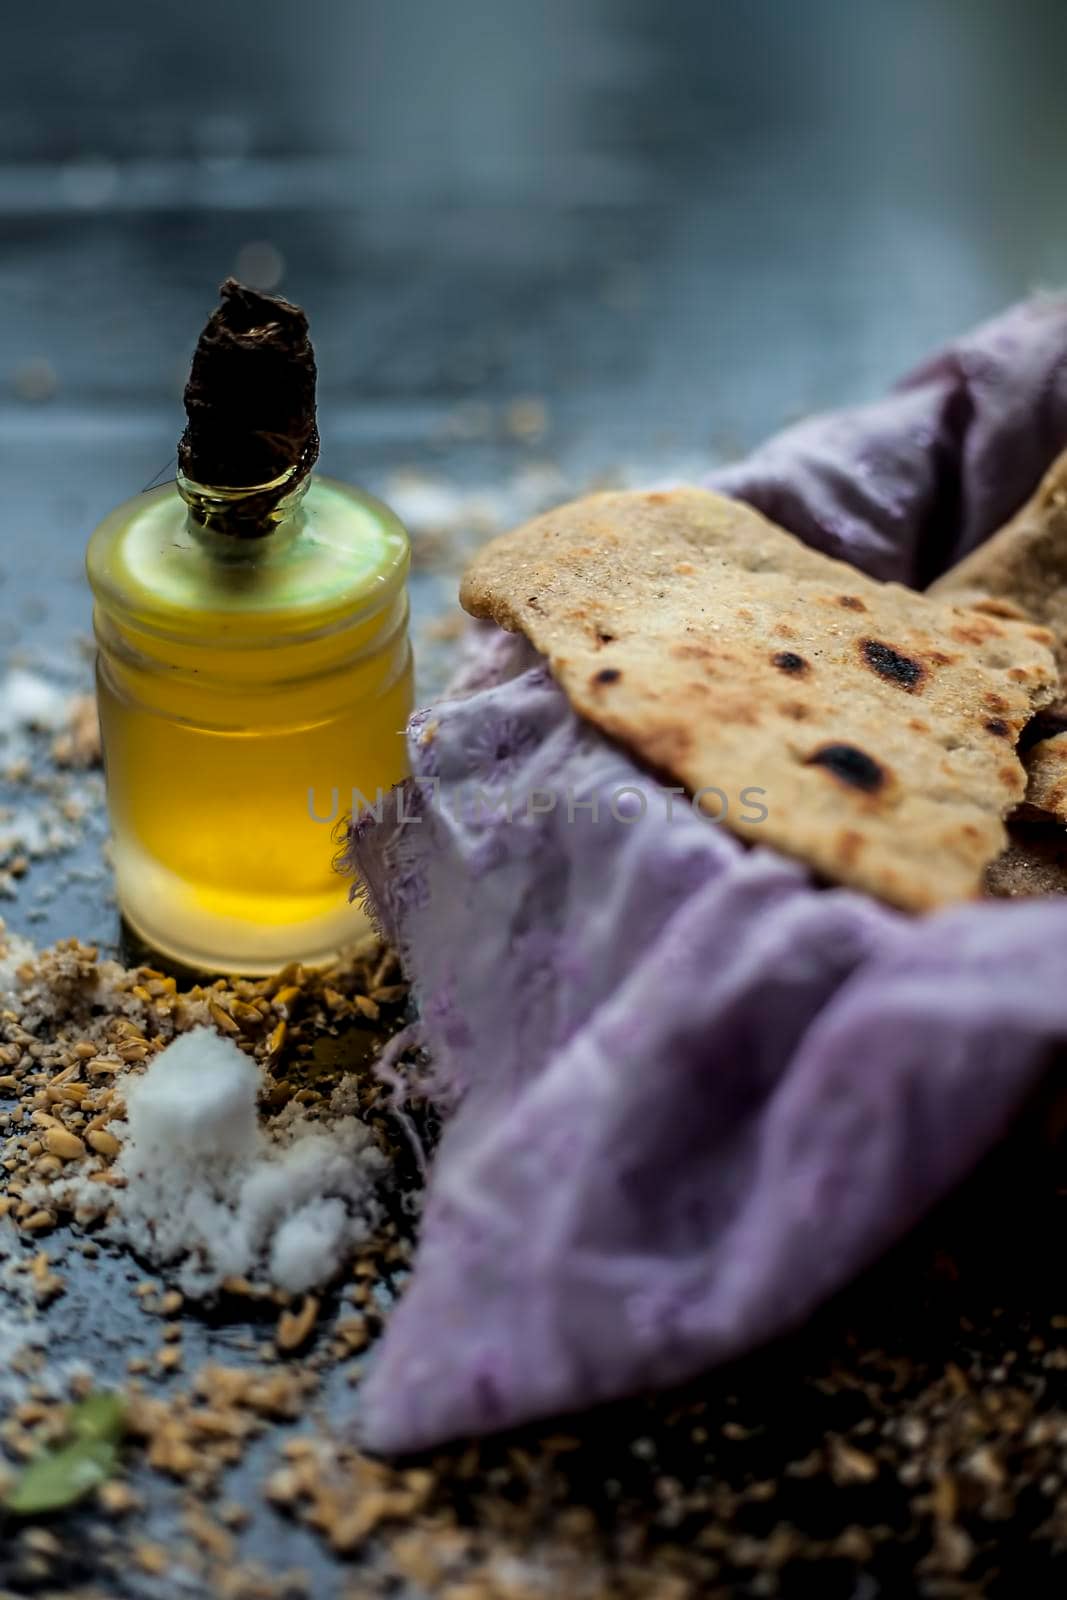 Shot of bhakri in a basket container along with some wheat flour spread on the surface and some cooking oil in a small glass bottle on a black colored surface. close up shot of traditional Gujarati bread Bhakri.